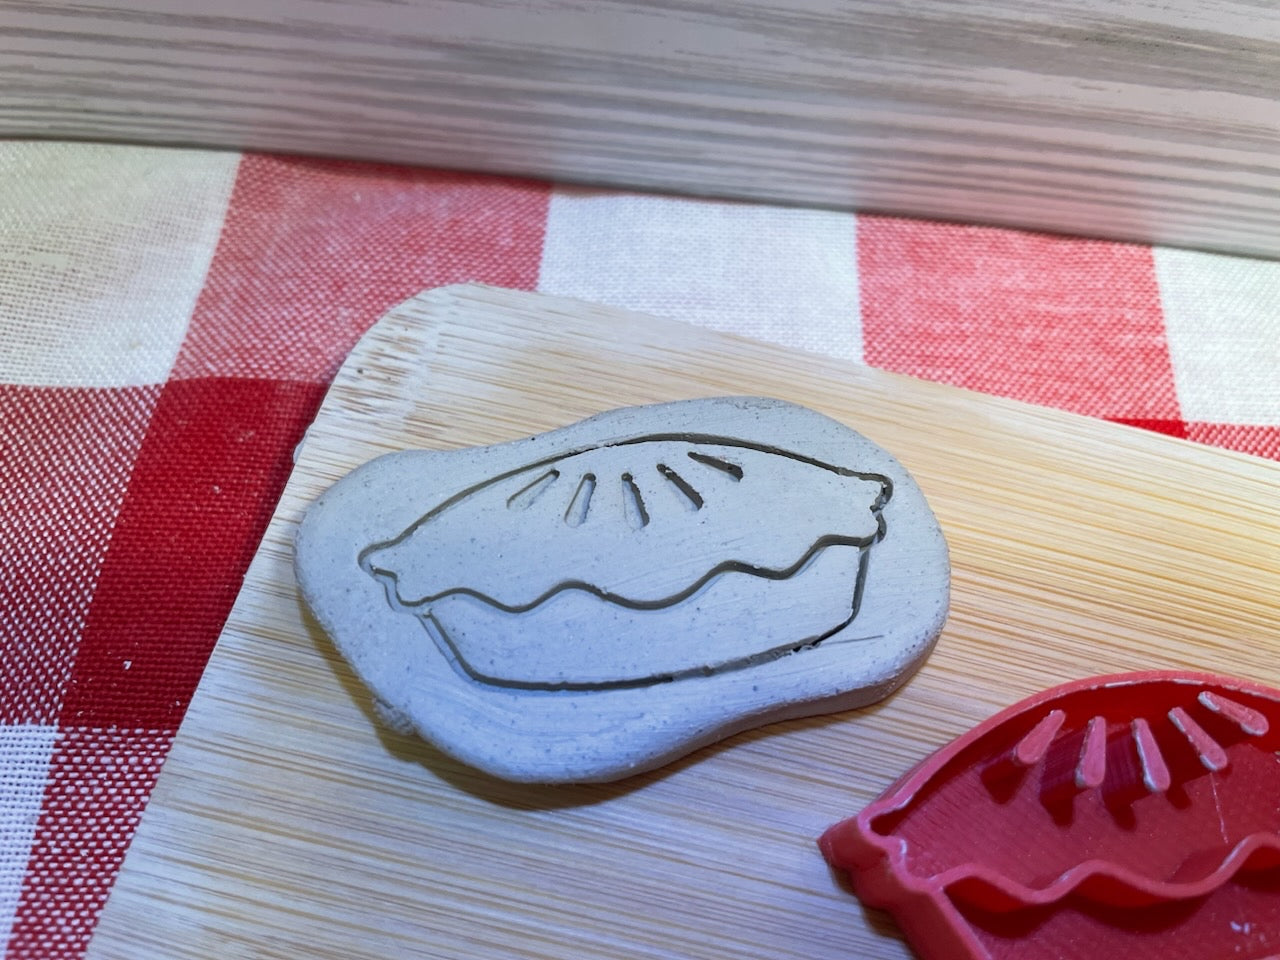 Pie Pottery Stamp - December 2023 Mystery Box, Plastic 3D printed, multiple sizes available